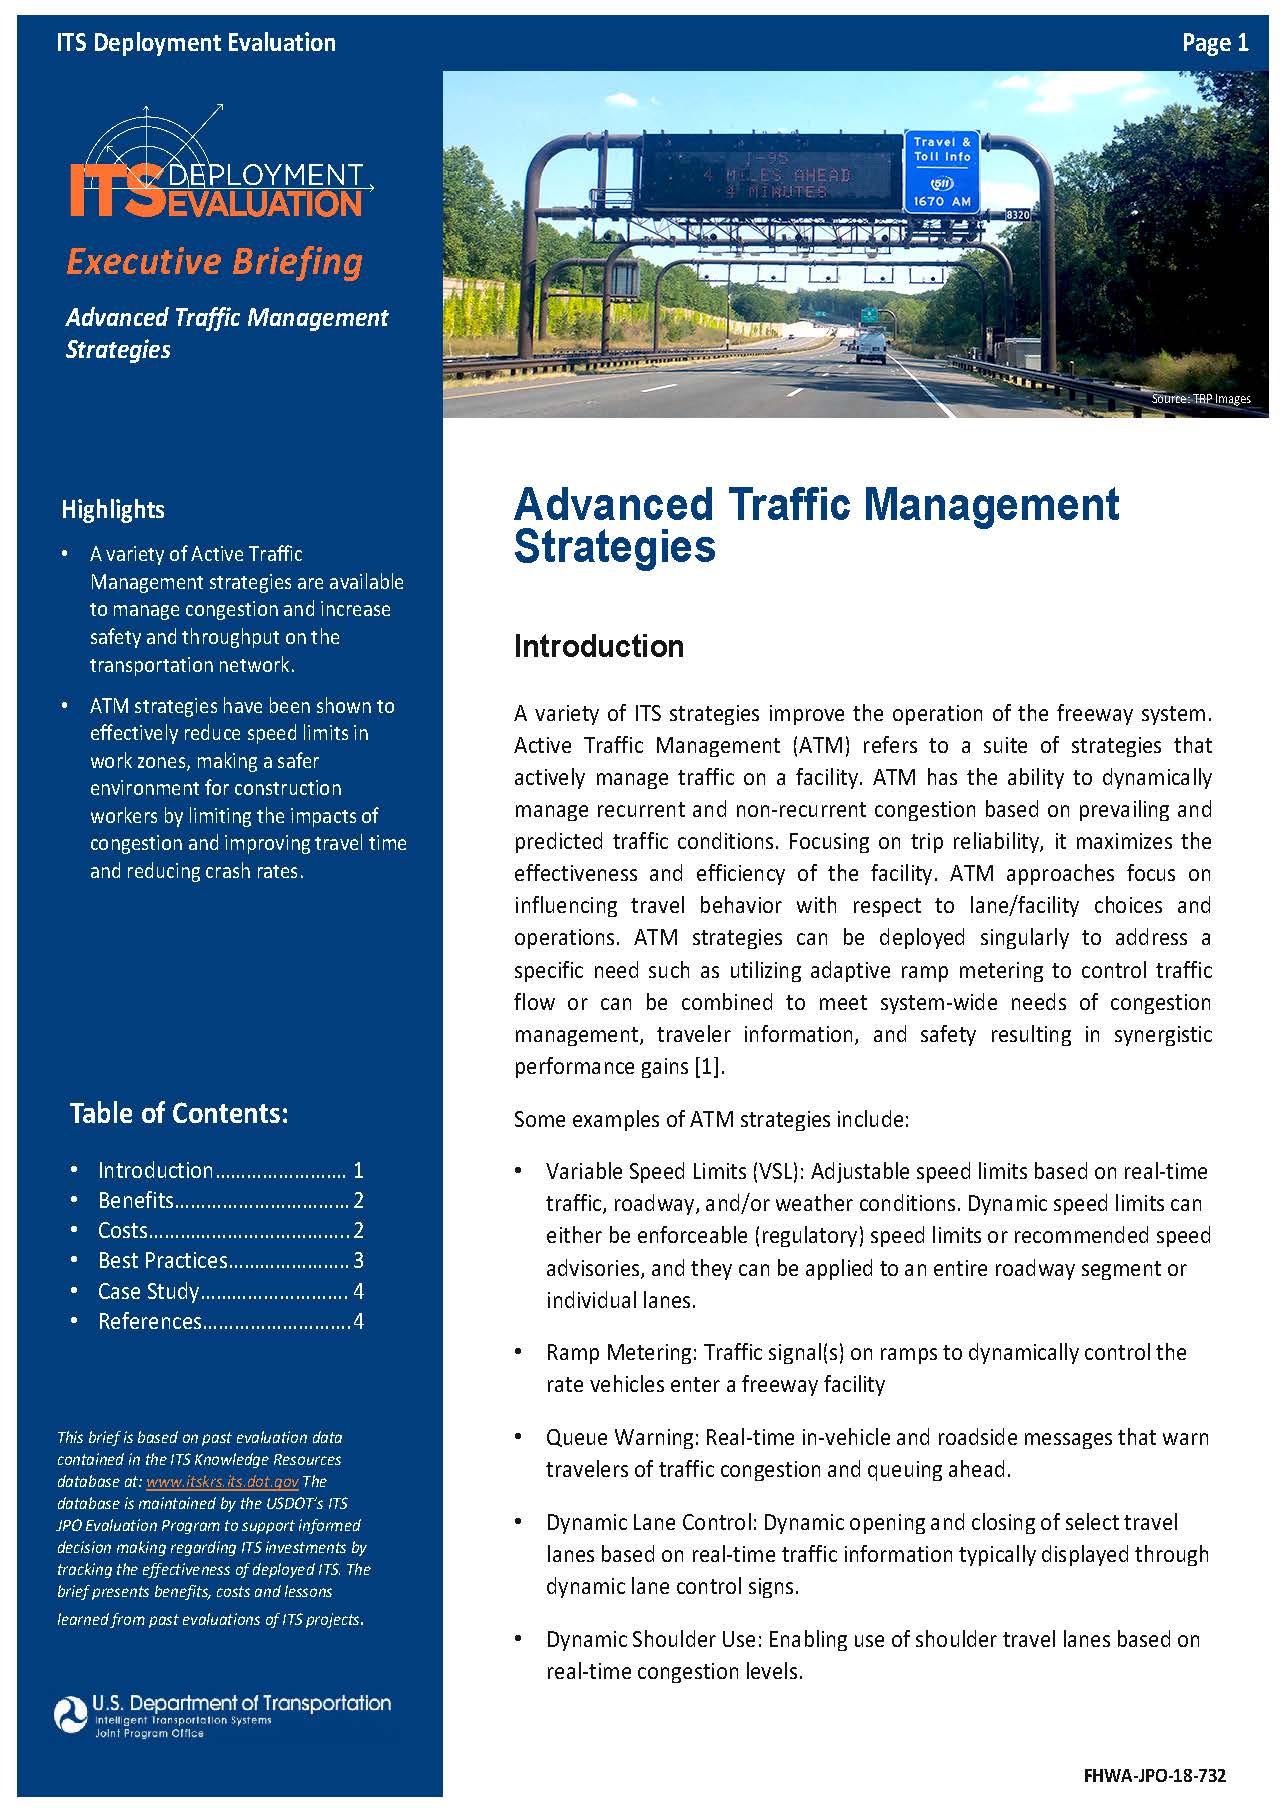 Cover Page of the Advanced Traffic Management Strategies 2019 Executive Briefing